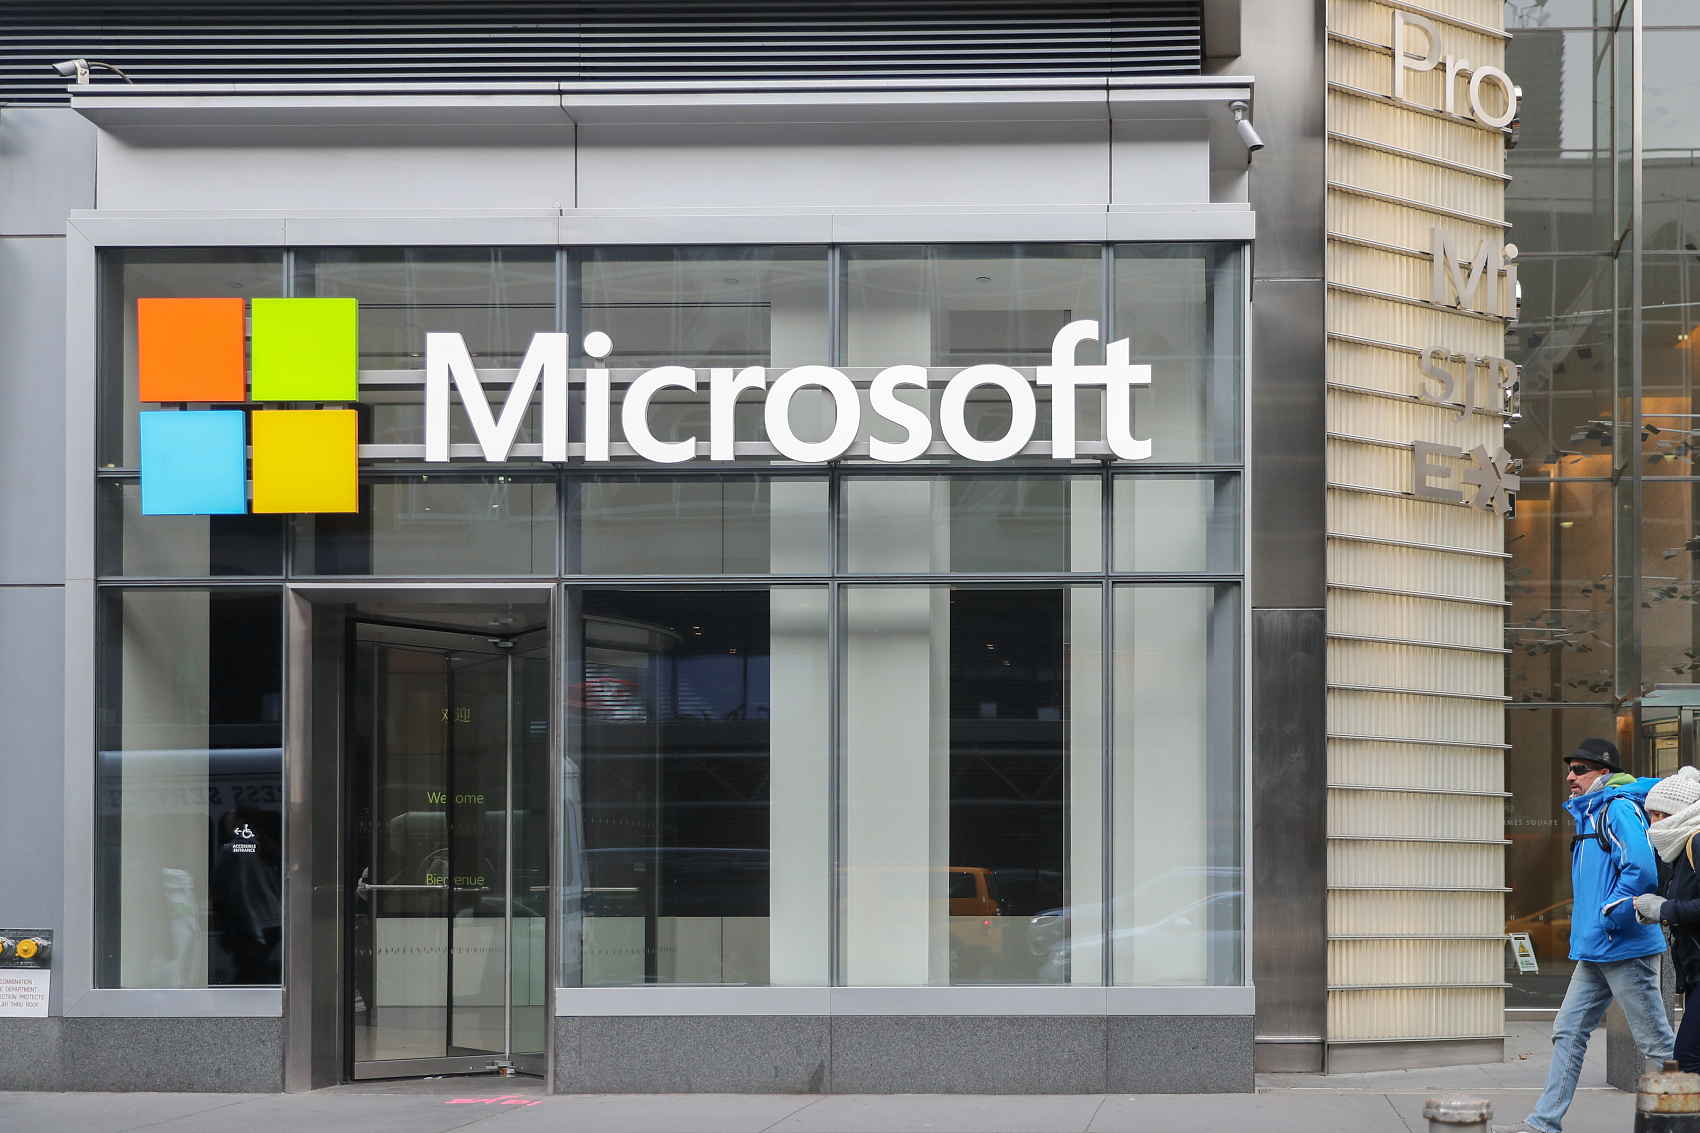 Microsoft global investment expands again! Investing 3.2 billion dollars to expand the AI infrastructure in Sweden.